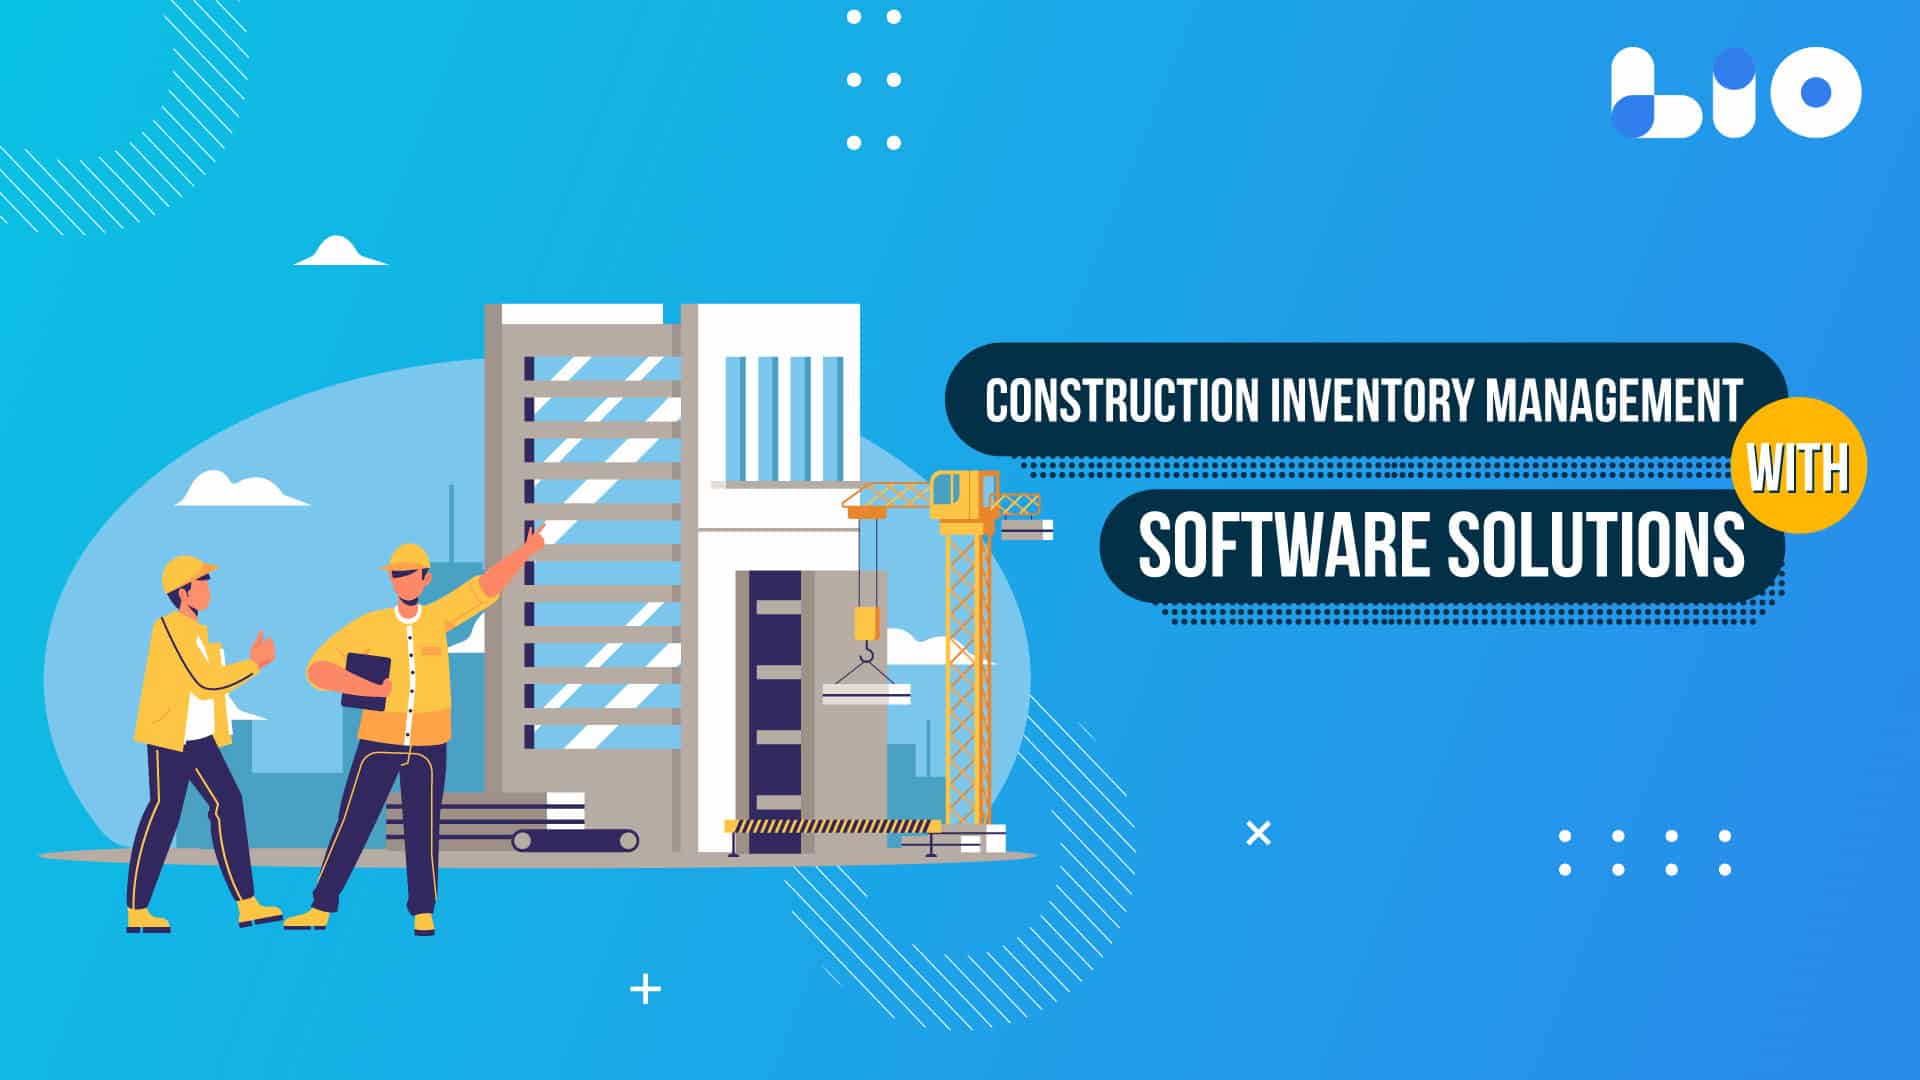 Streamlining Construction Inventory Management Software Solutions